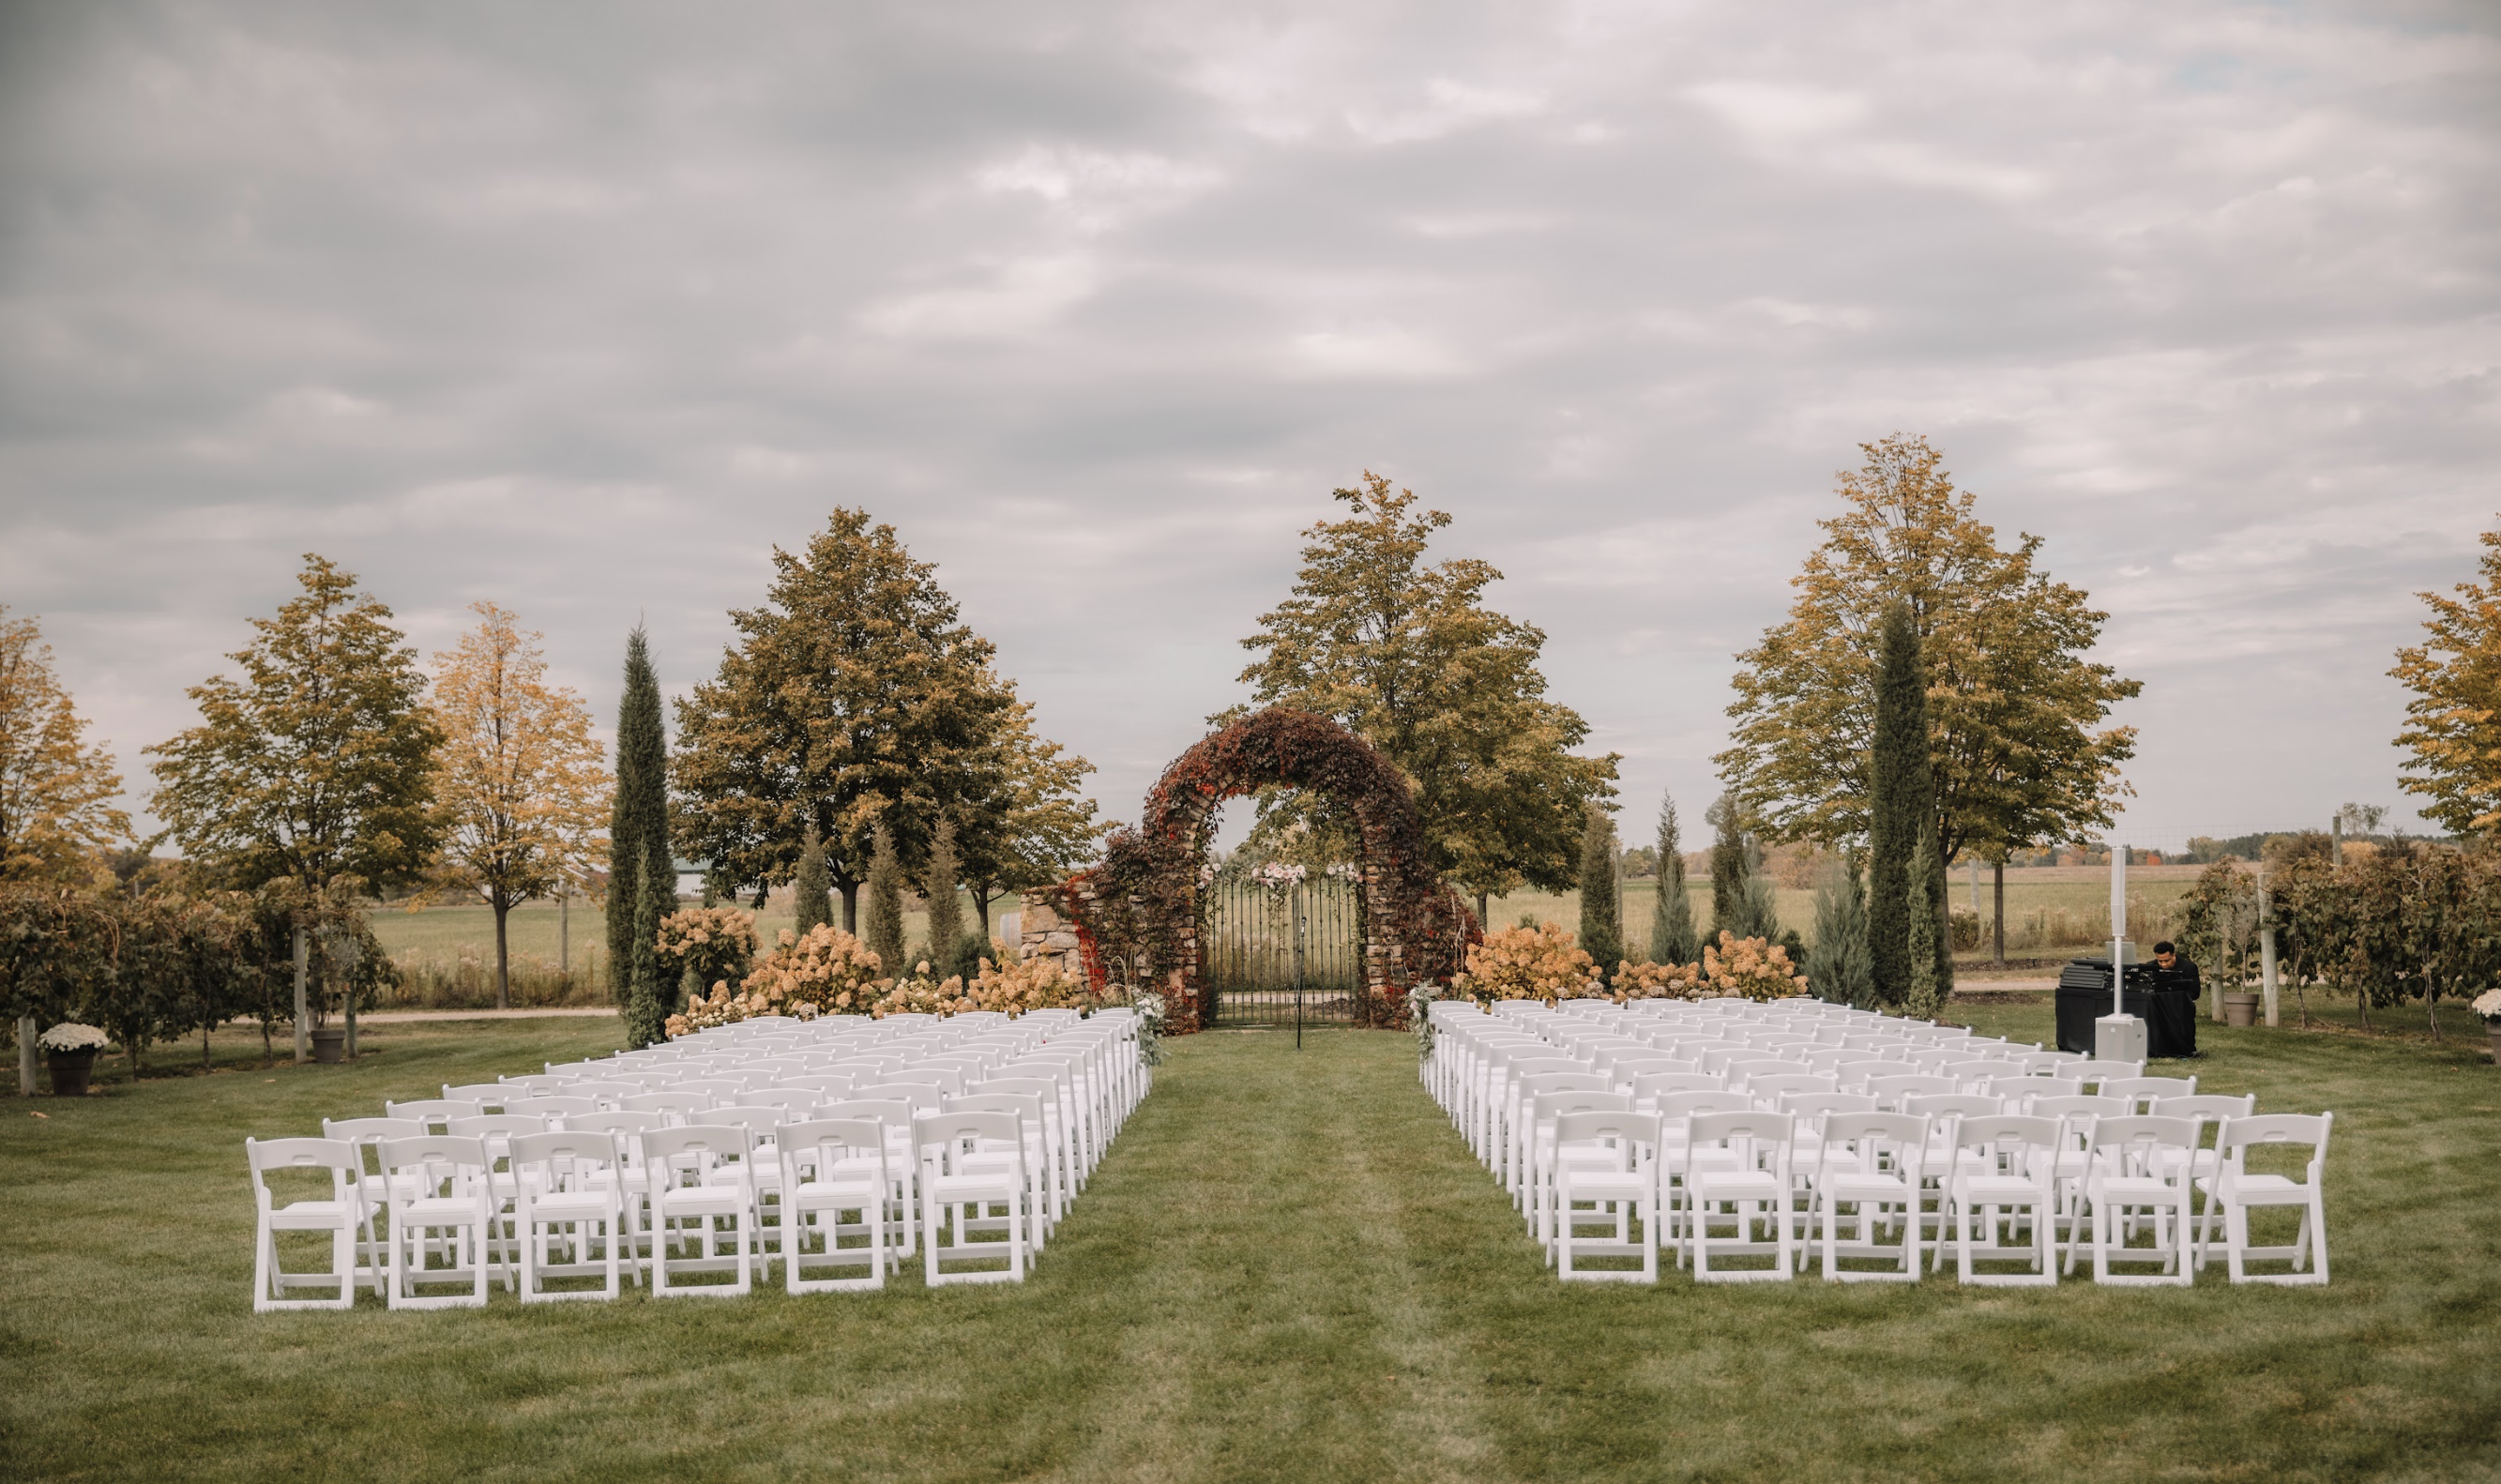 Outdoor ceremony spot in between a vineyard lawn at The Redeemed Farm wedding venue in Minnesota